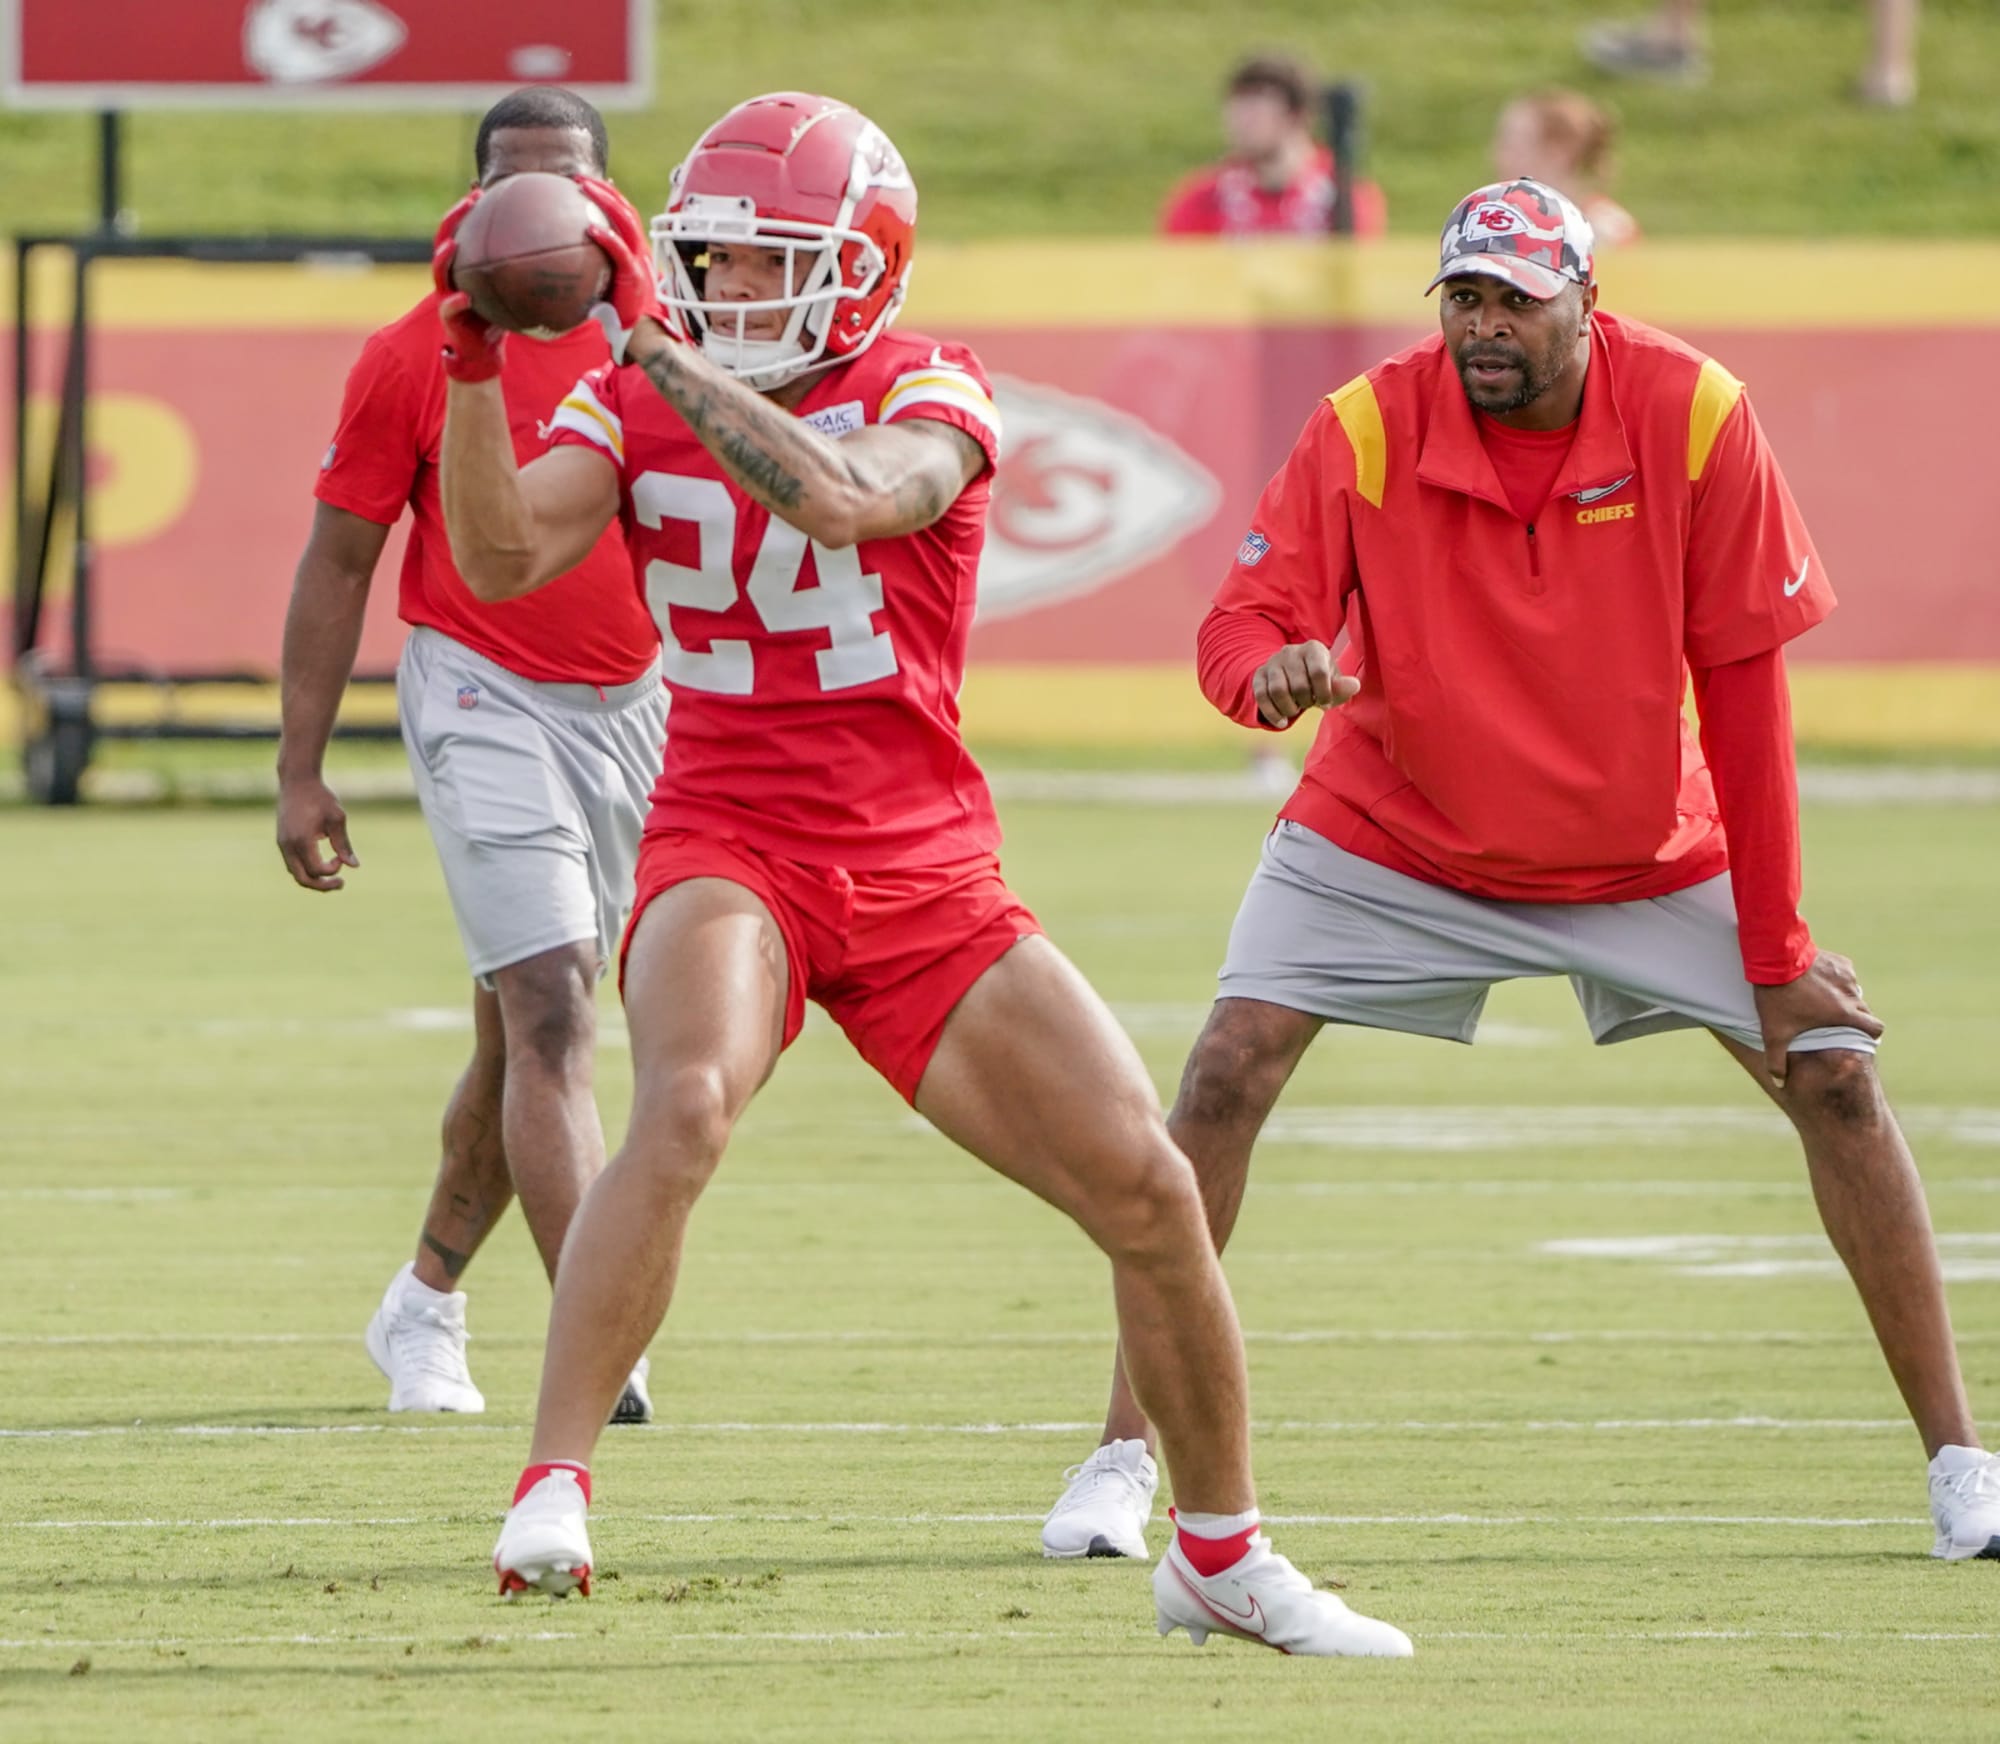 Kansas City Chiefs’ training camp rookie Skyy Moore making noise with